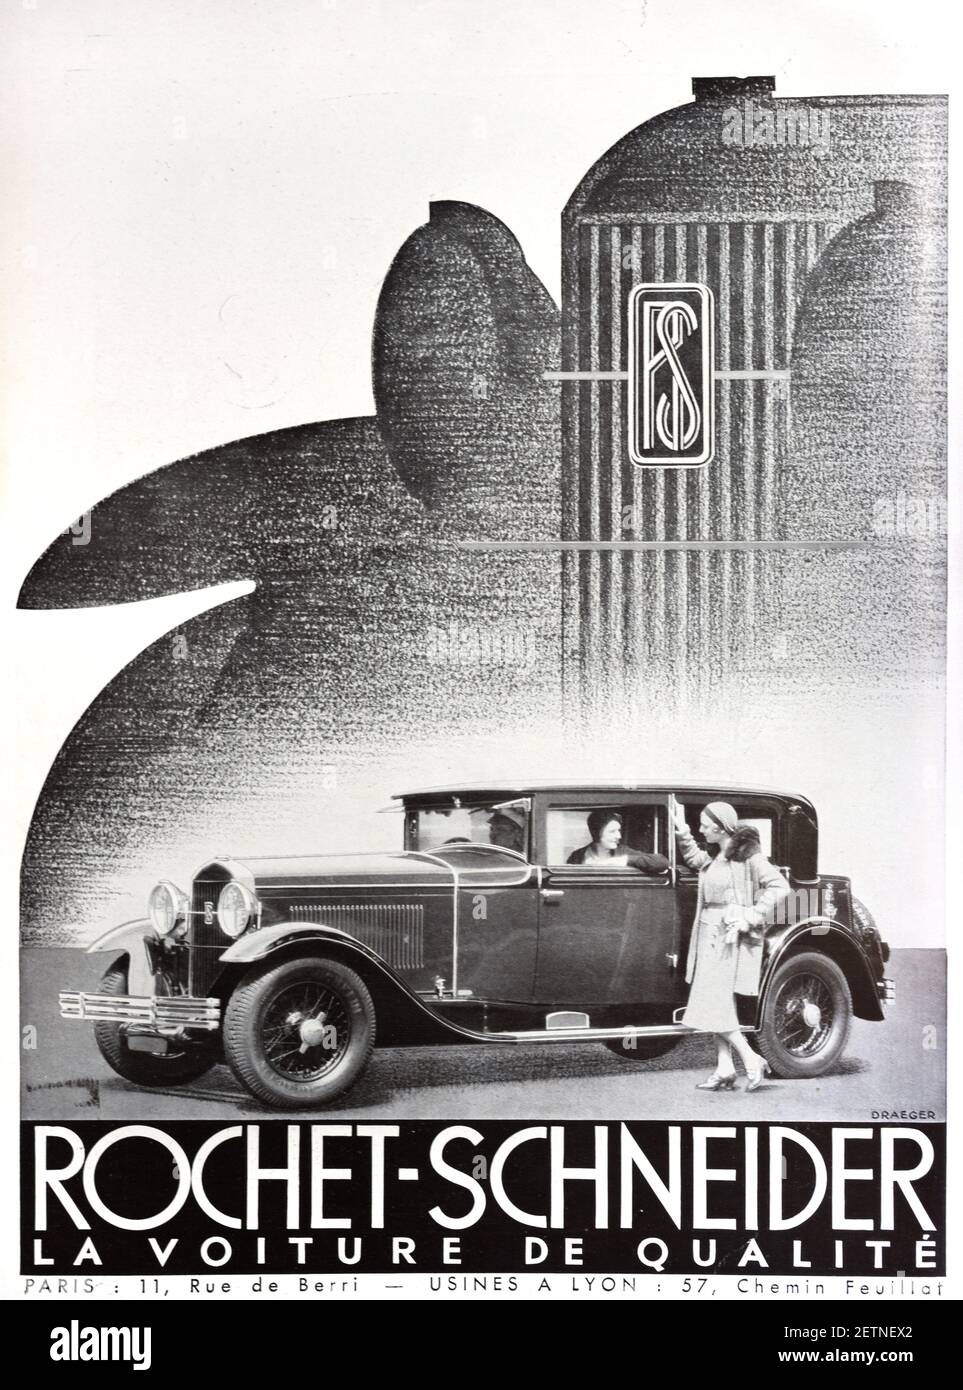 Vintage Advert or Publicity for Rochet-Schneider Luxury Vintage Car or Luxury Automobile with Flapper Woman 1931 Stock Photo